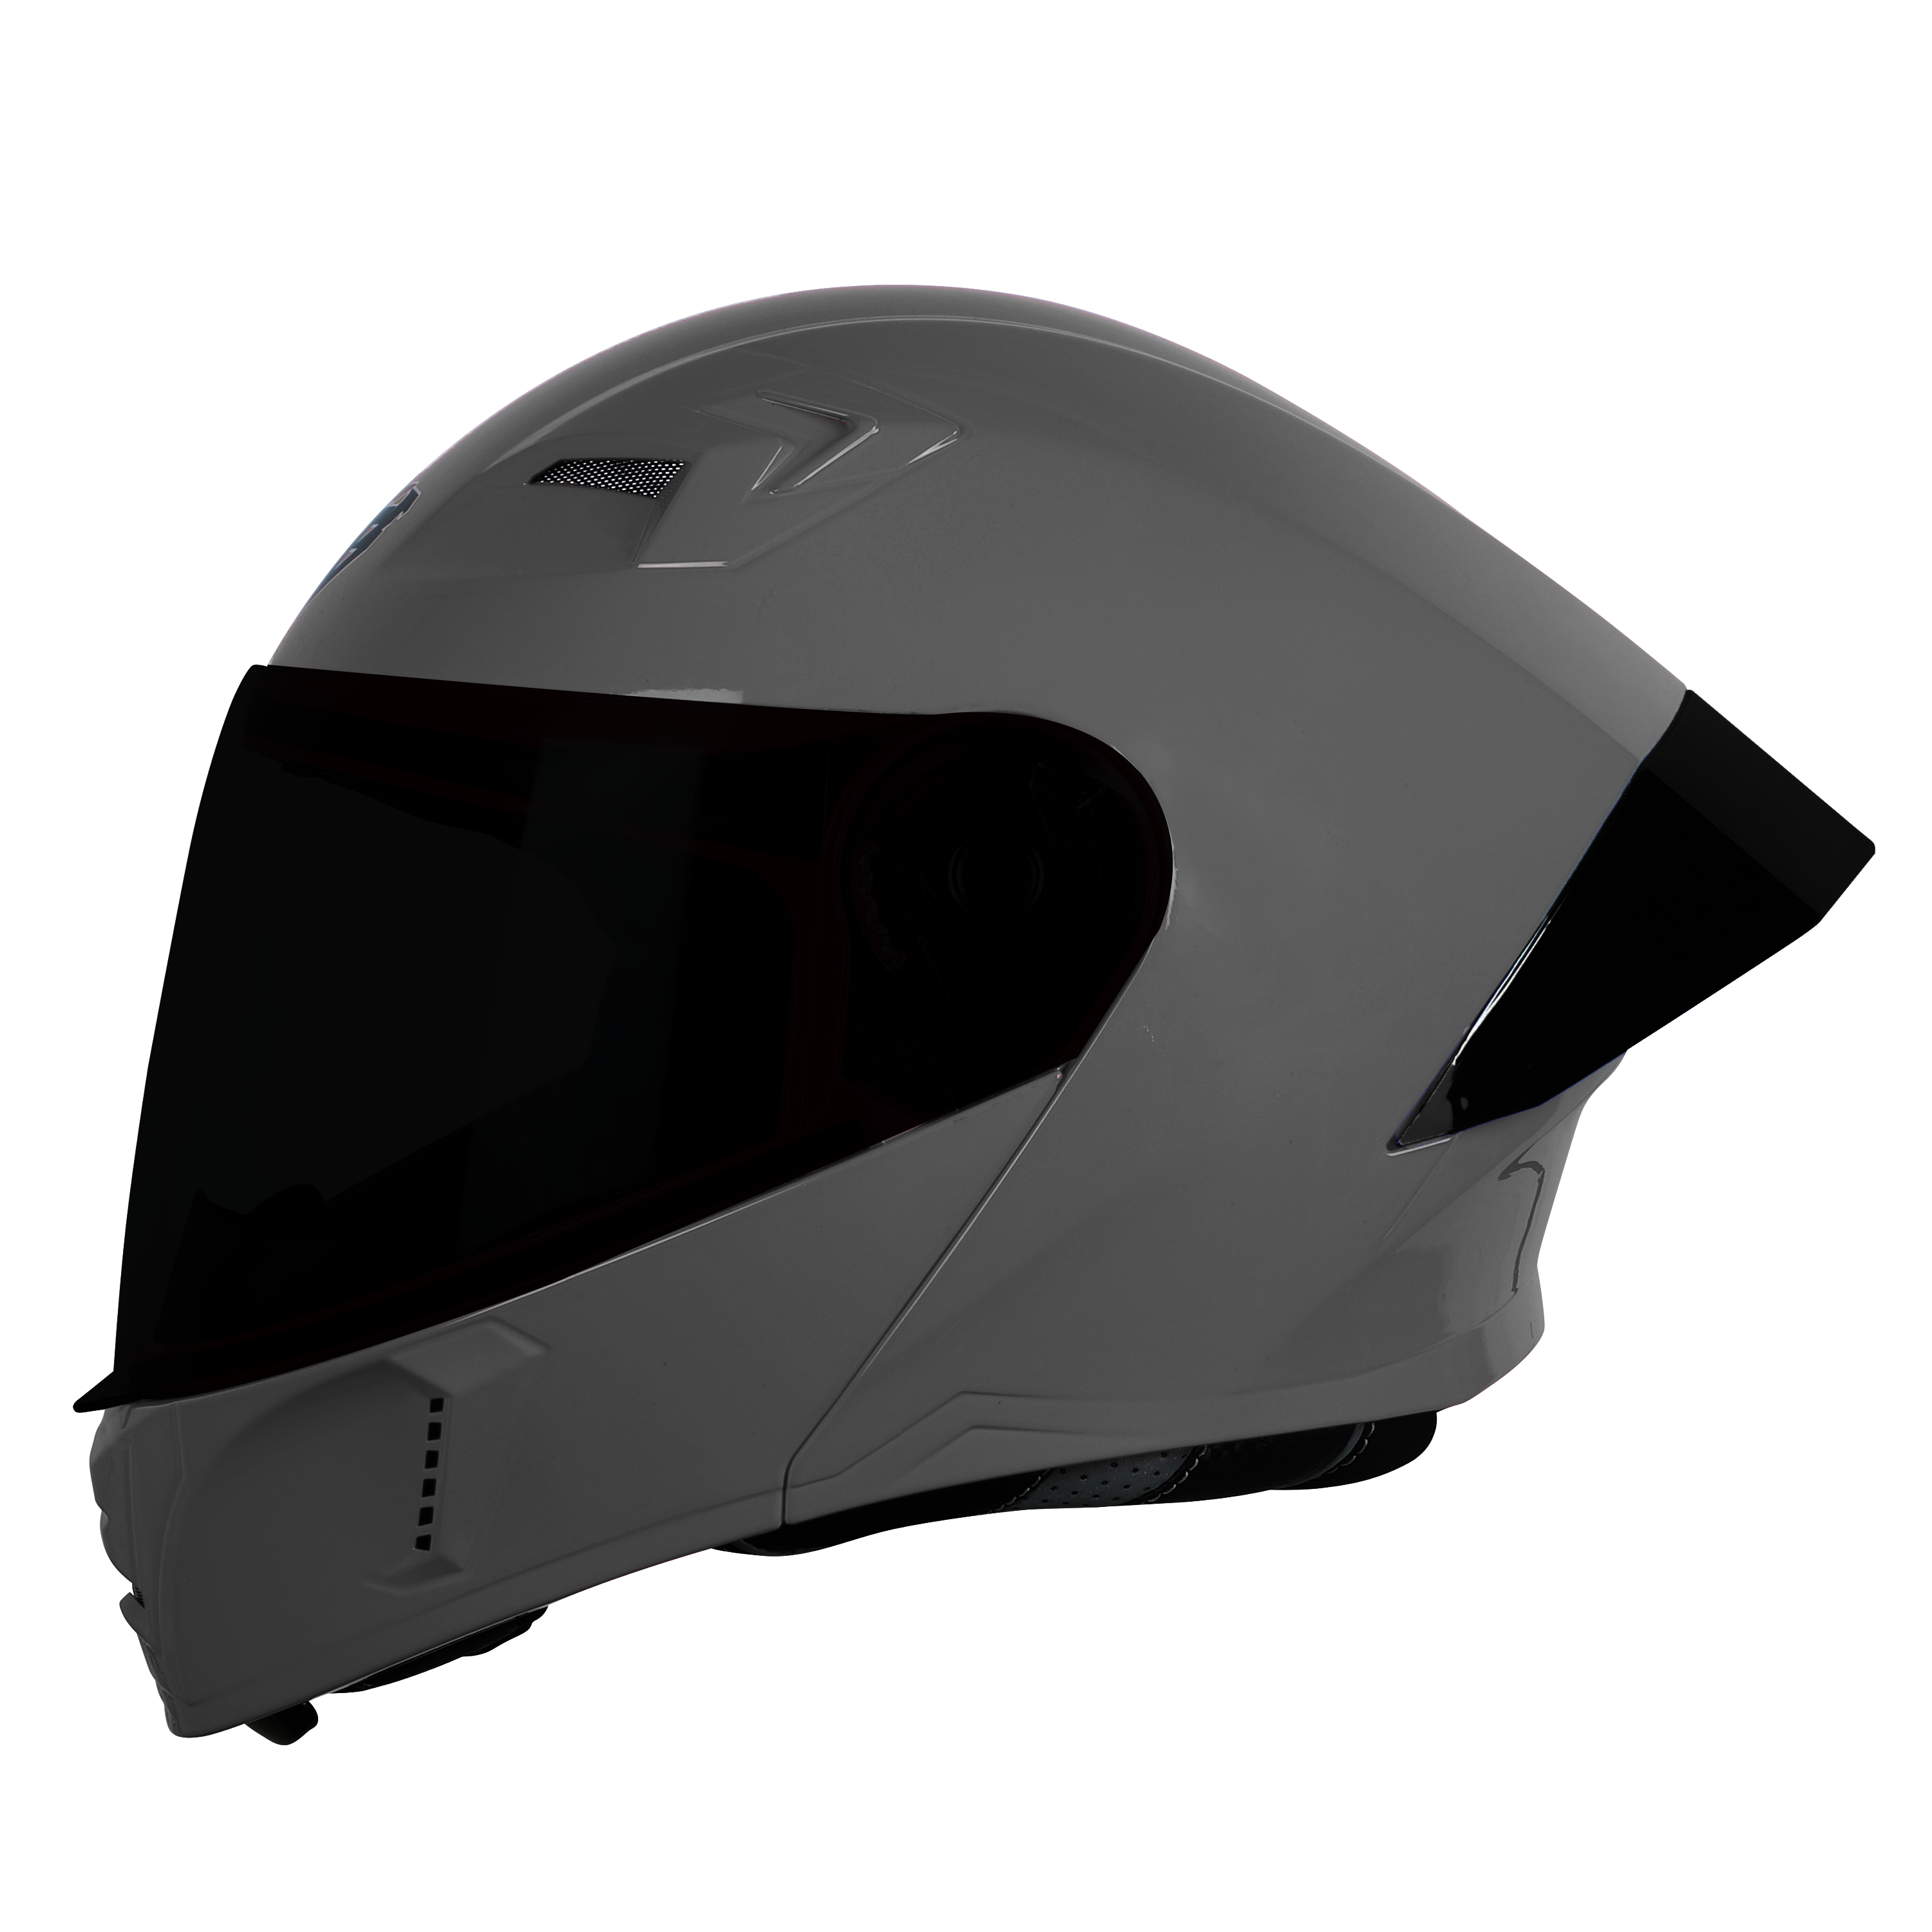 Steelbird SBA-20 7Wings ISI Certified Flip-Up Helmet With Black Spoiler For Men And Women With Inner Smoke Sun Shield (Glossy H. Grey With Smoke Visor)